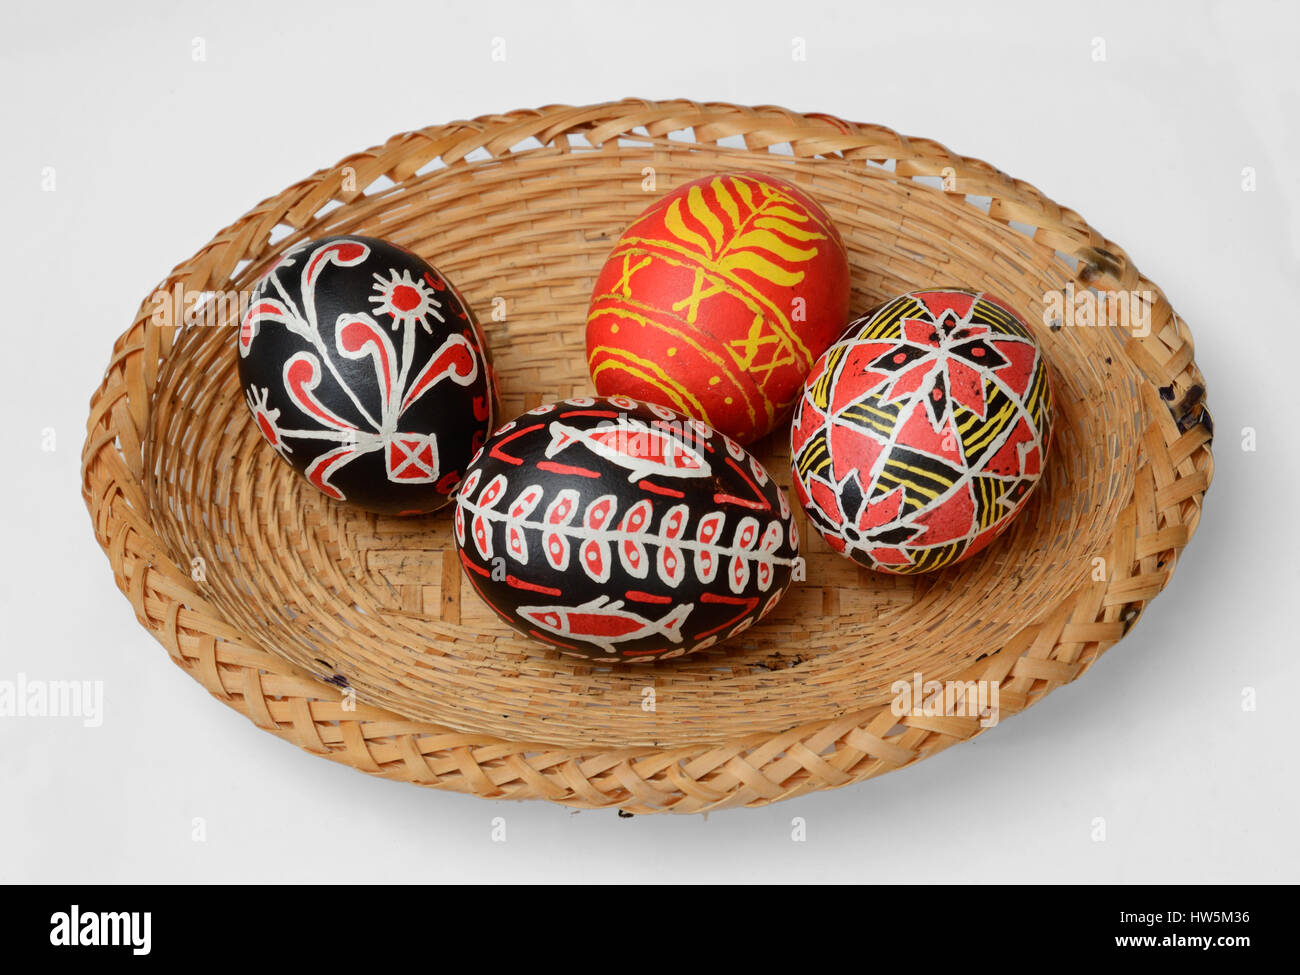 The bunch of handmade pysankas are gathered inside of the straw basket. The Easter eggs are decorated with a pattern using a wax-resist method. Stock Photo